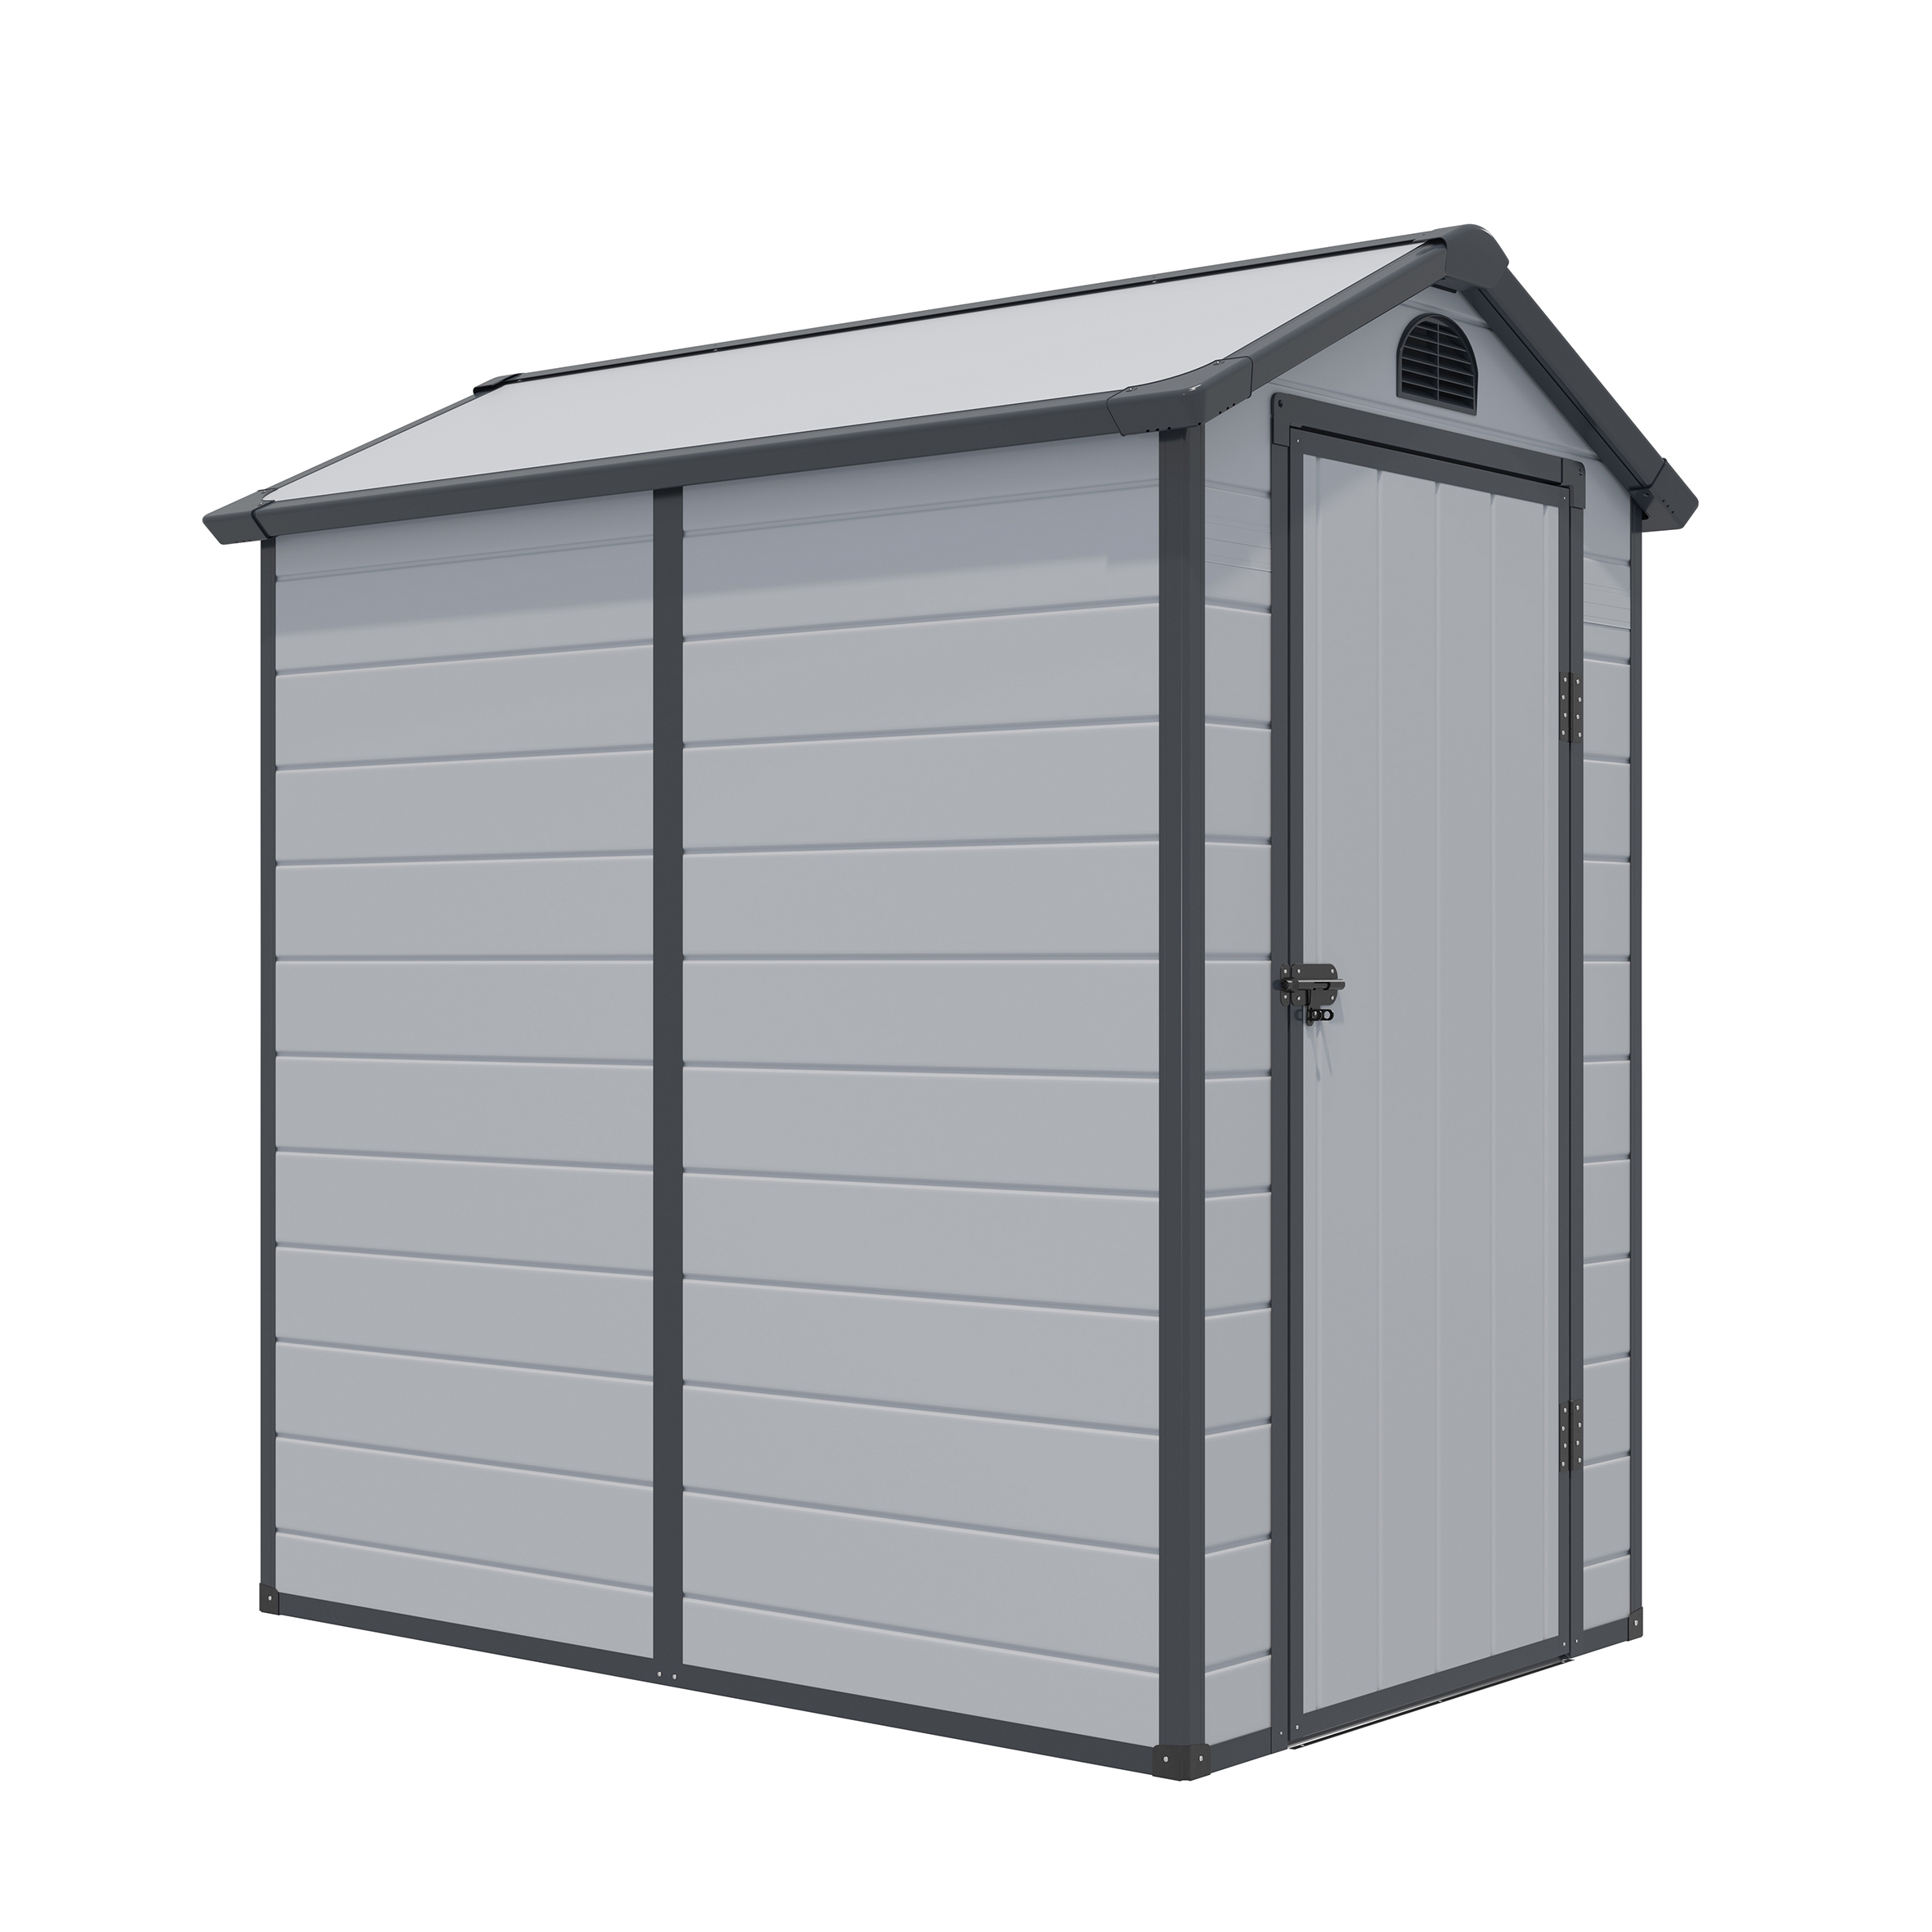 Featured image for “RGP | Airevale™ Apex Shed 4x6 (Light Grey)”